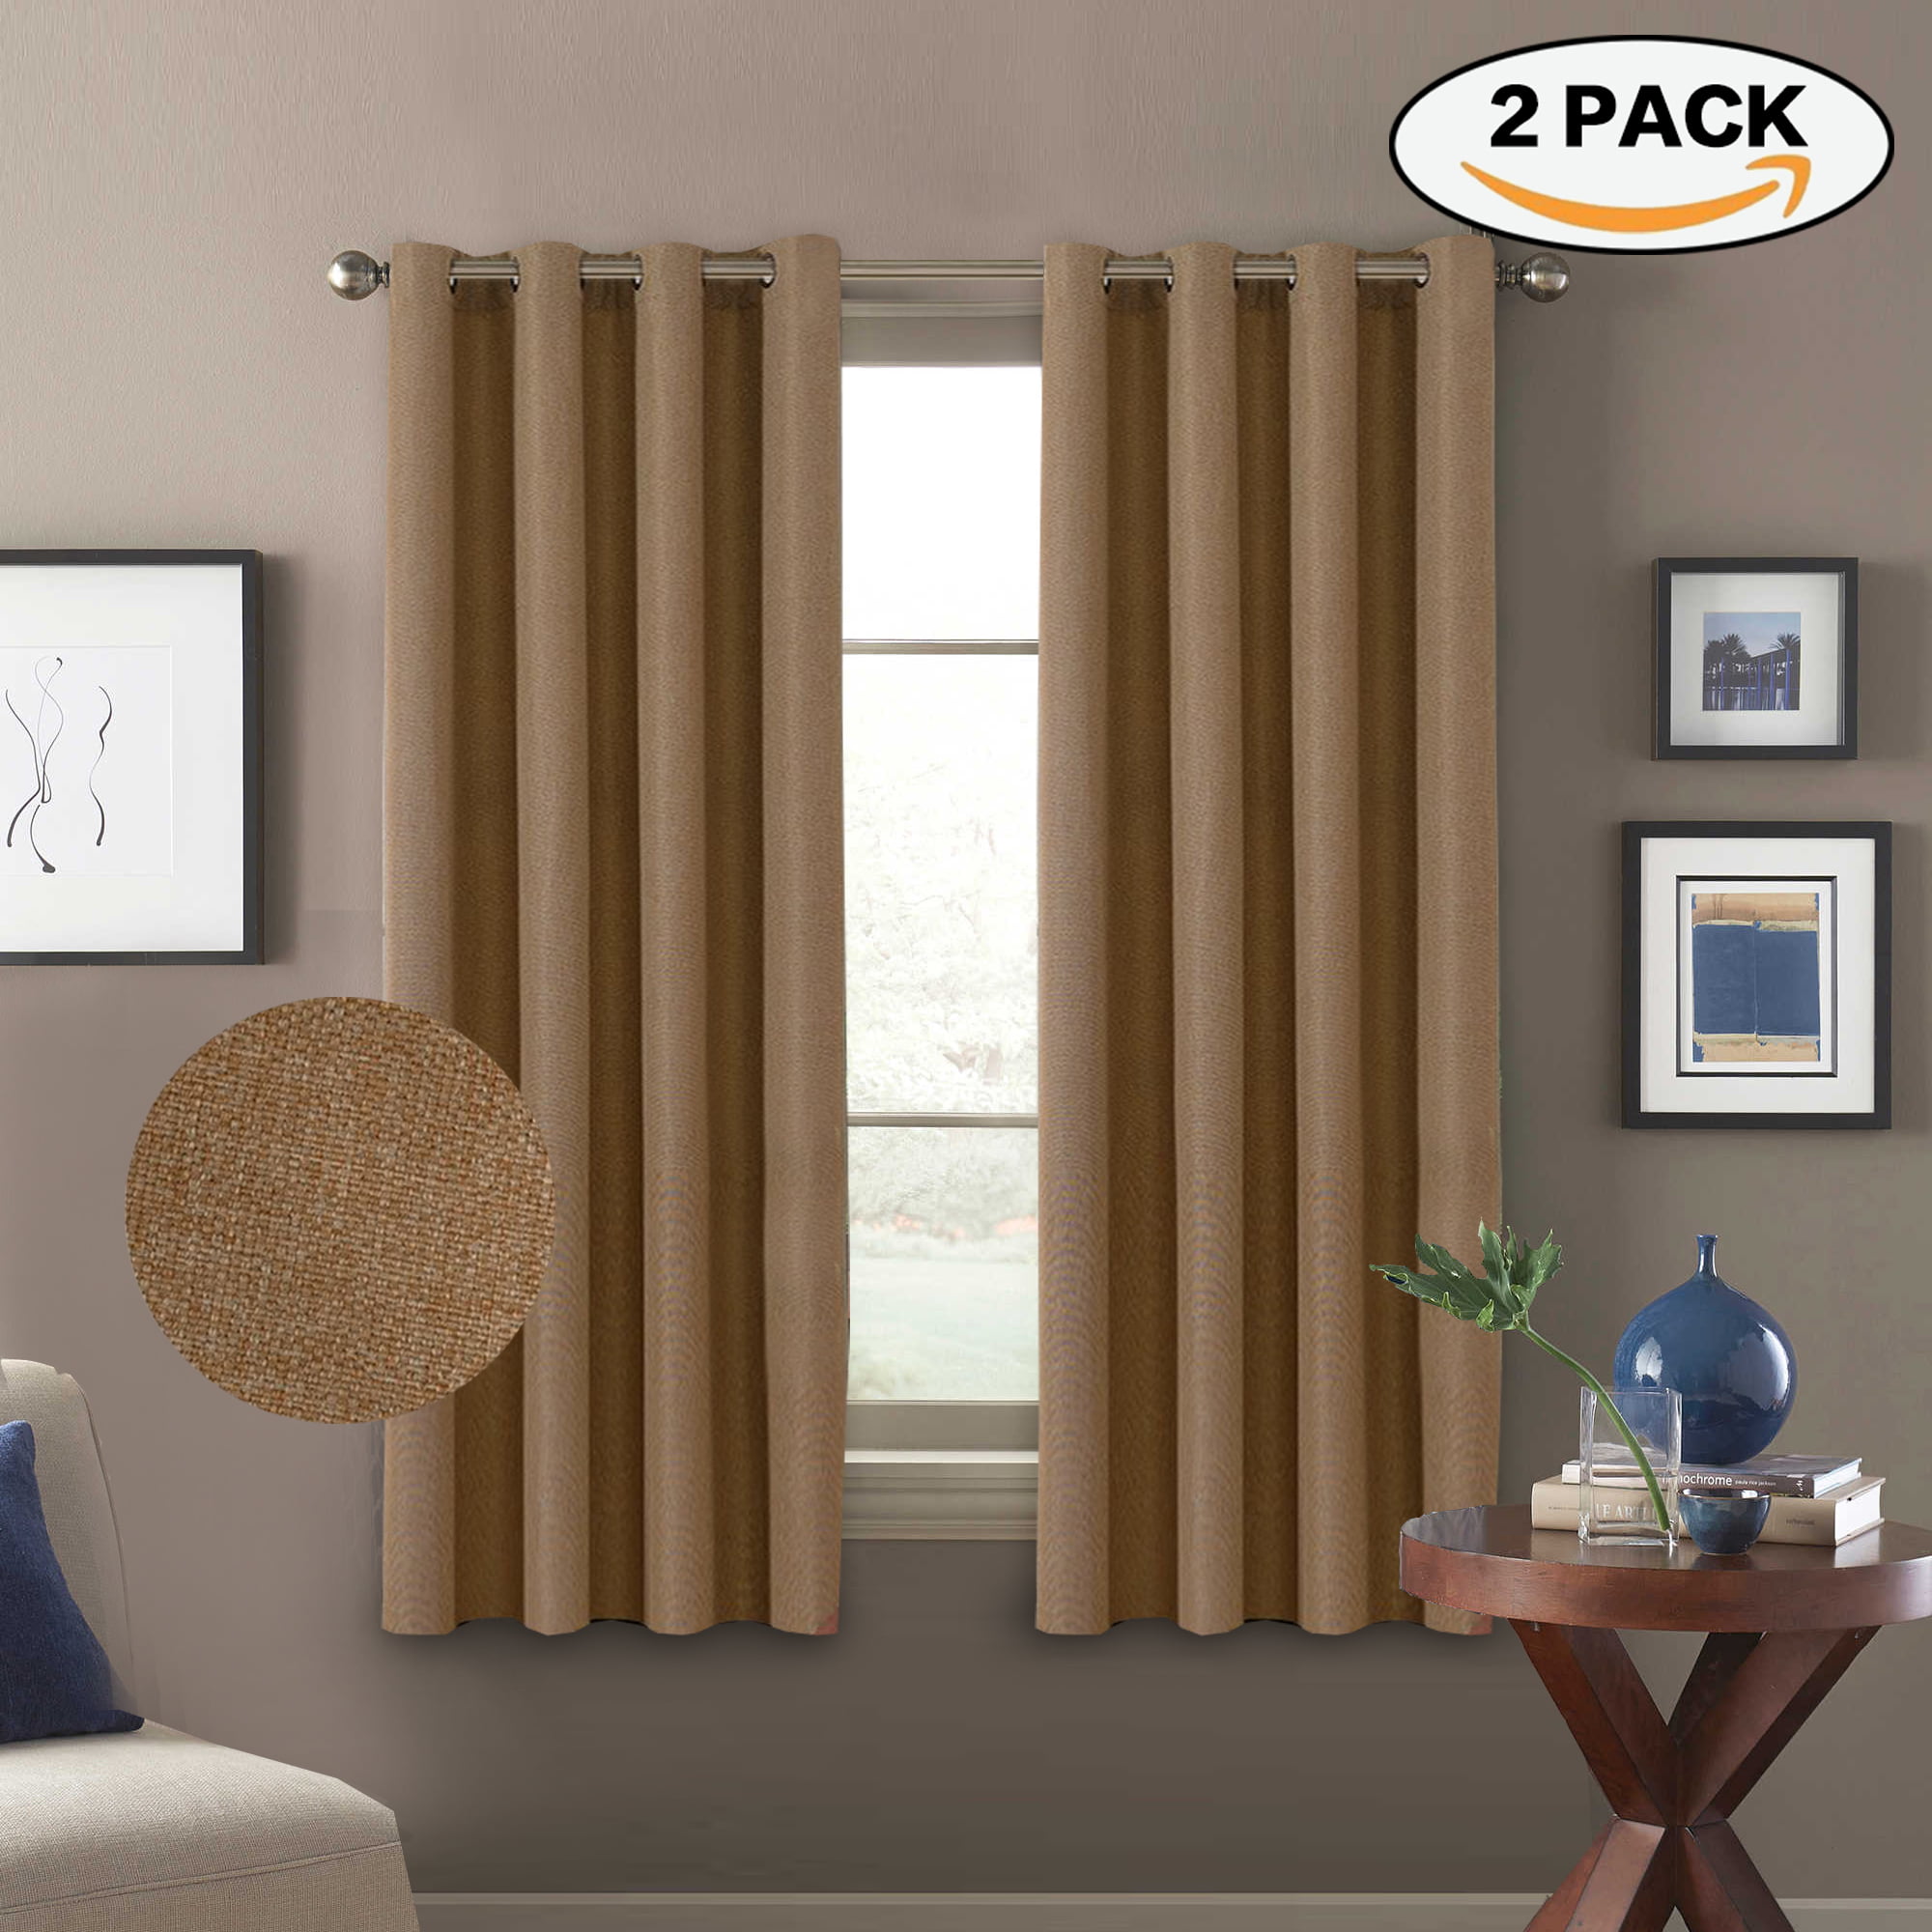 Window Treatments / Drapes for Bedroom 1 Panel, 52 x 84, Quatrefoil Navy 1 Panel Mellanni Thermal Insulated Blackout Curtains Living Room with Silver Grommet and 1 Tieback